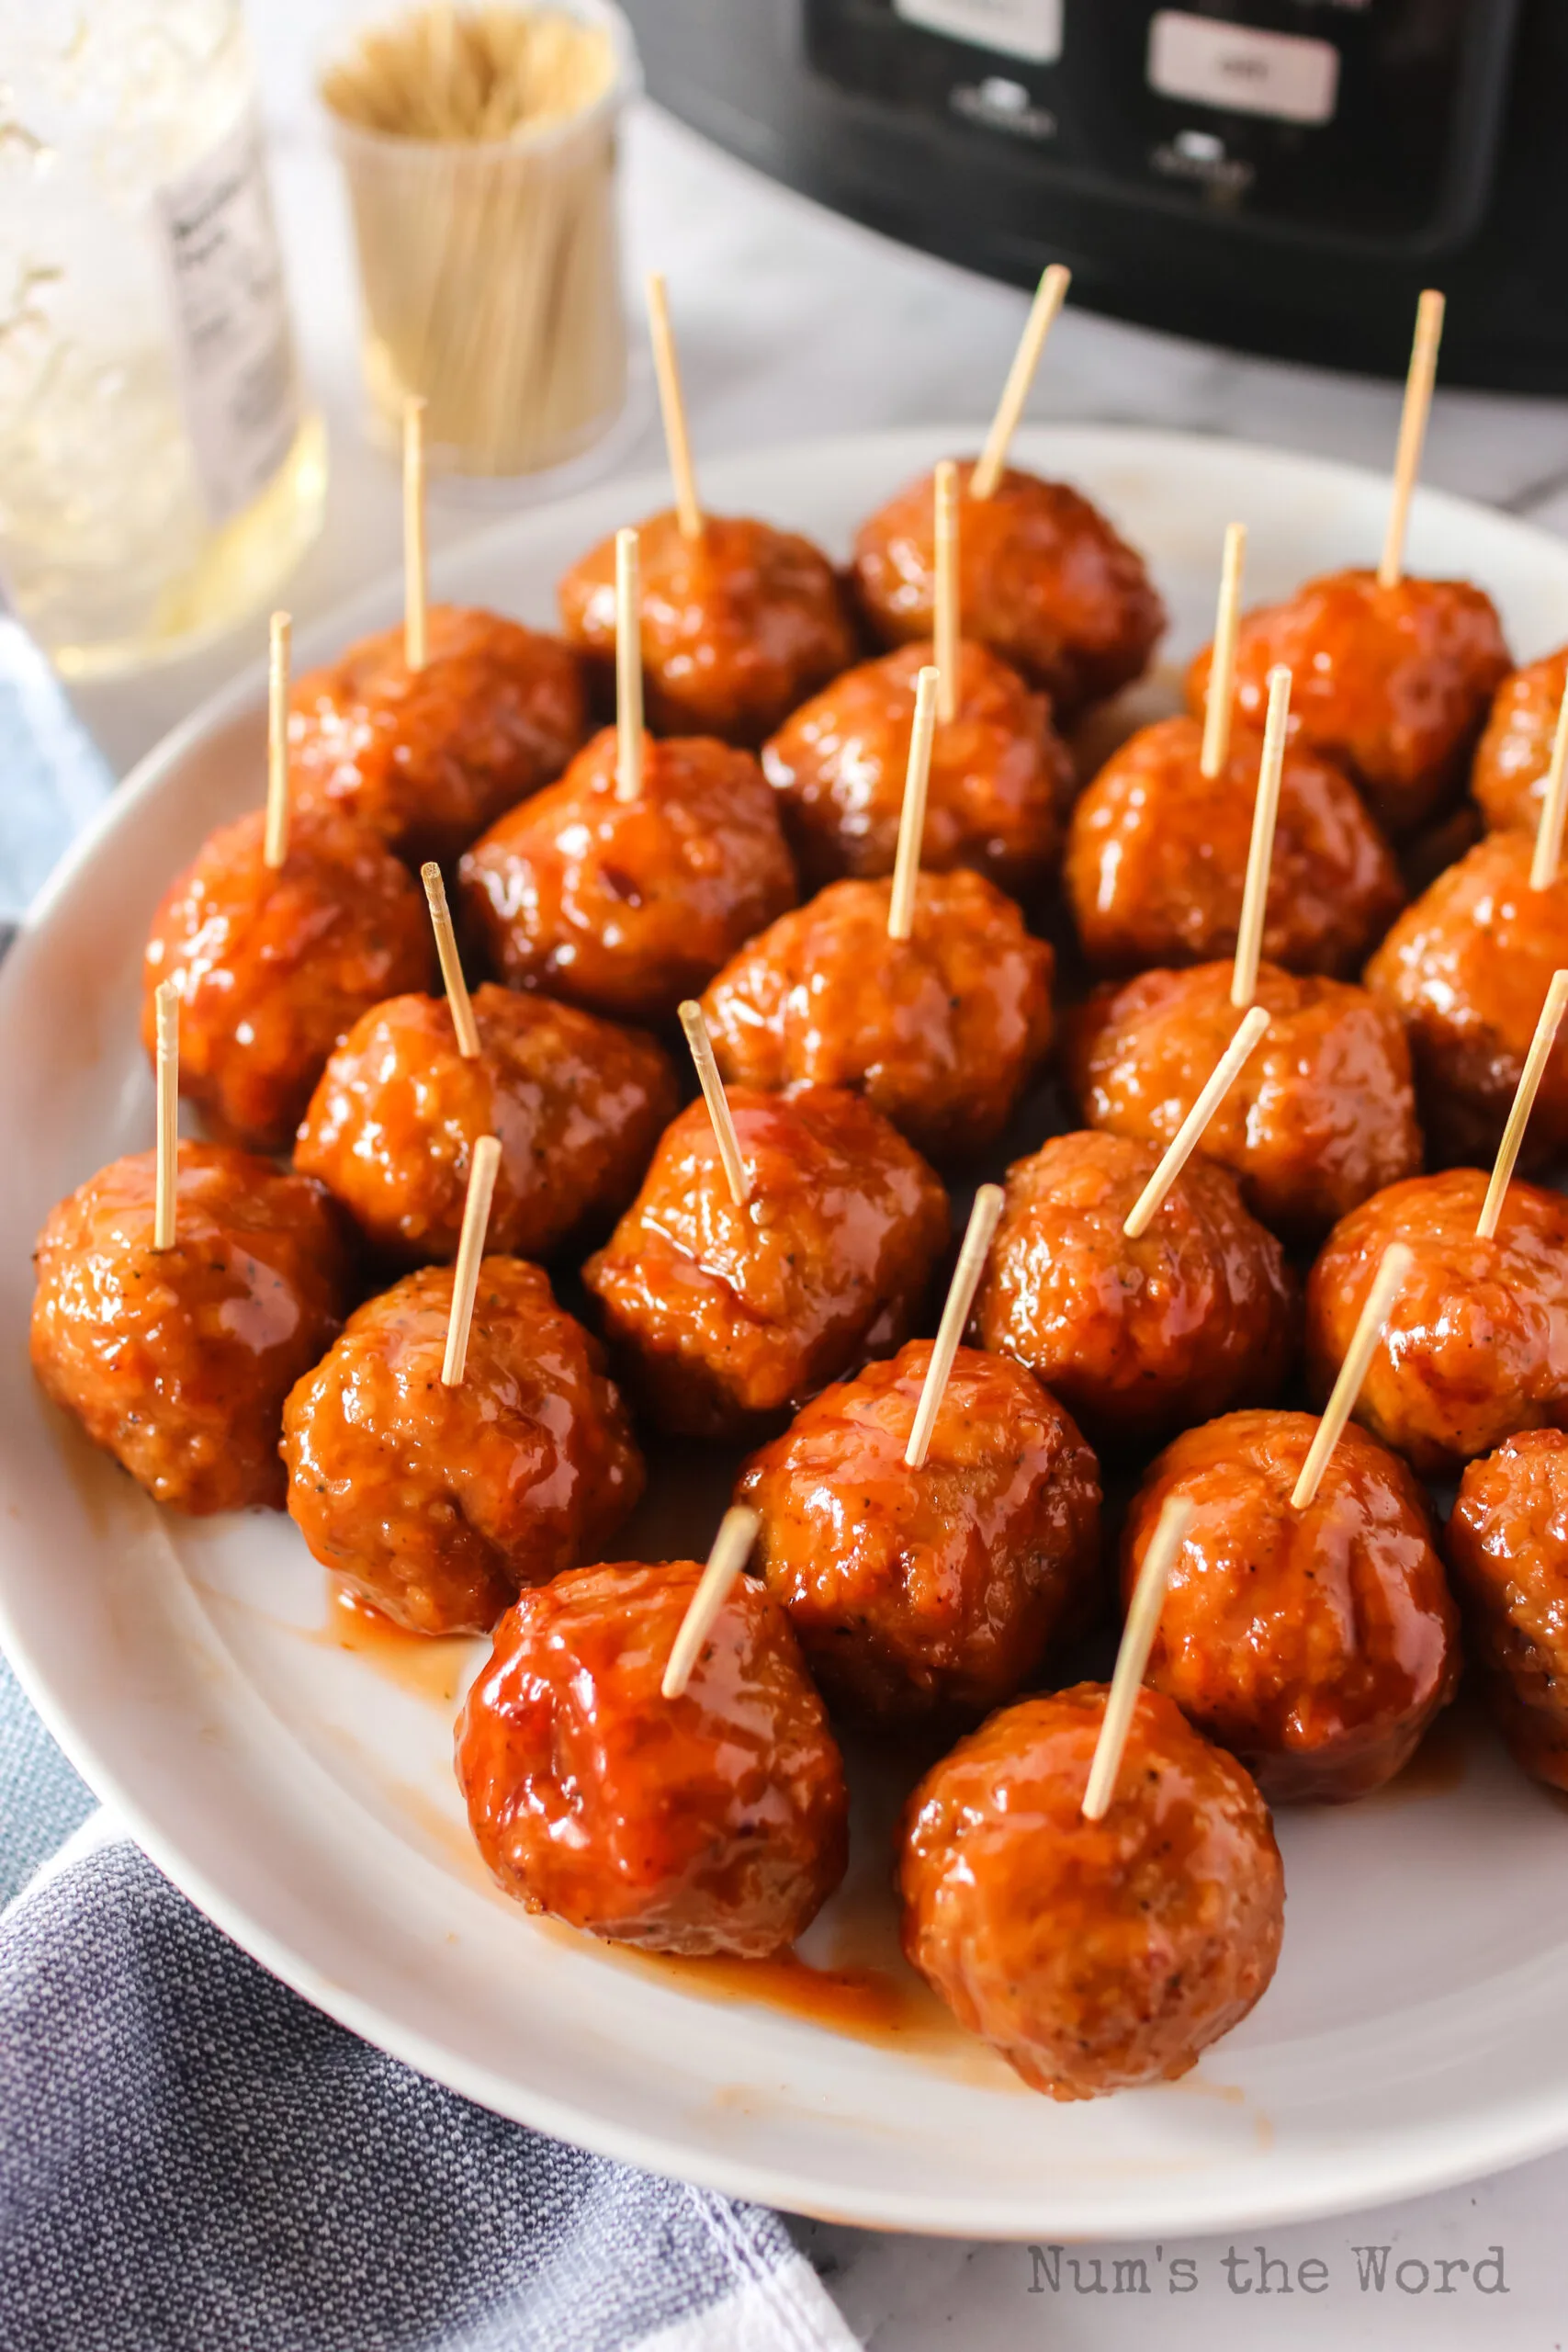 top side view of meatballs on platter with toothpicks